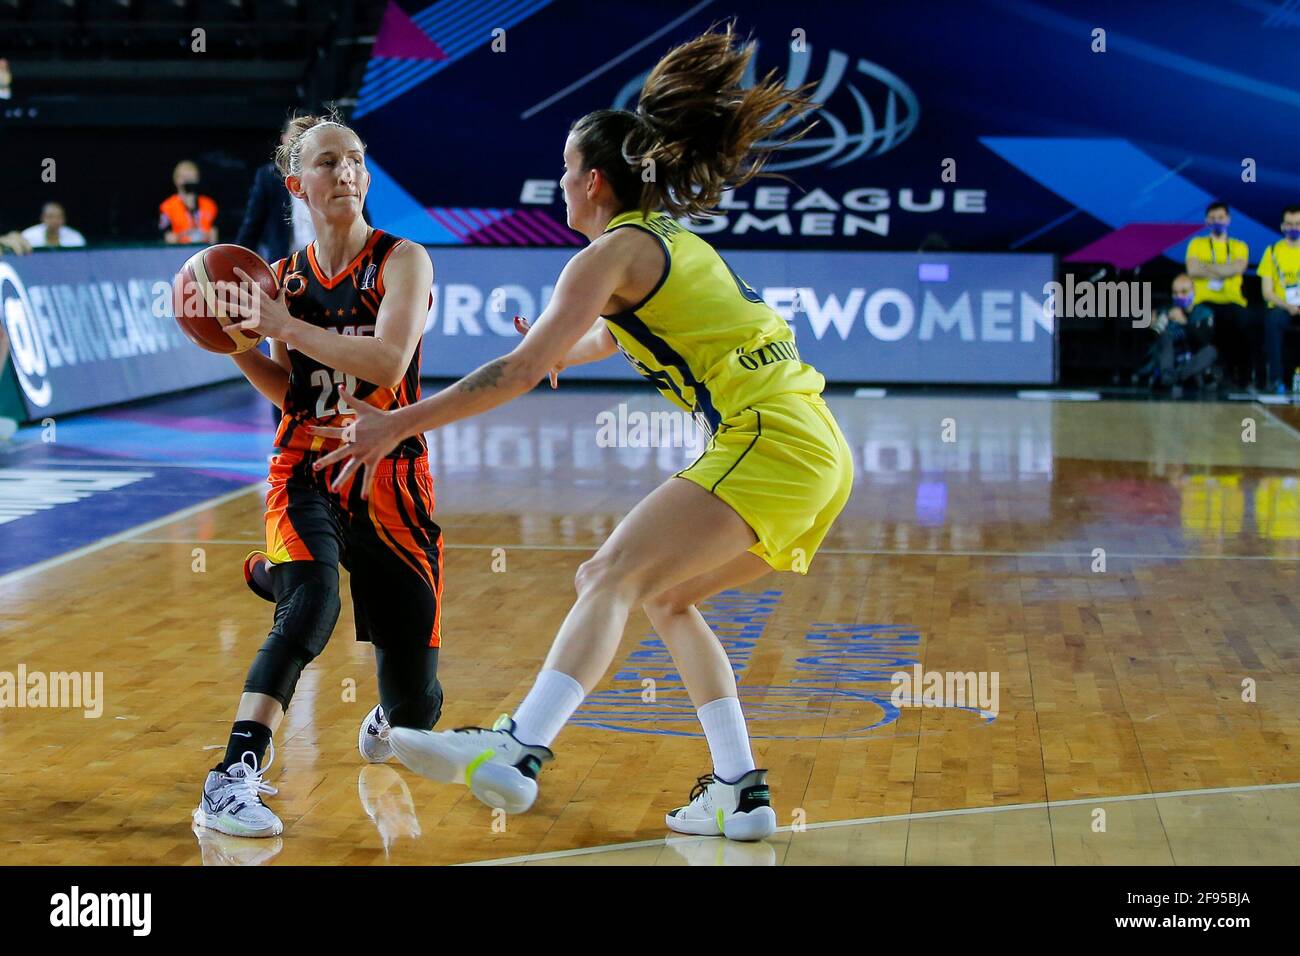 ISTANBUL, Turkey. 16th Apr, 2021: Basketbal: Fenerbahce Oznur Kablo v UMMC Ekaterinburg: Istanboel ISTANBUL, Turkey. 16th Apr, 2021. APRIL 16: Courtney Vandersloot of UMMC Ekaterinburg, Olcay Cakir of Fenerbahce Oznur Kablo during the Euroleague Women Final Four match between Fenerbahce Oznur Kablo and UMMC Ekaterinburg at Volkswagen Arena on April 16, 2021 in Istanbul, Turkey (Photo by /Orange Pictures) Credit: Orange Pics BV/Alamy Live News Stock Photo